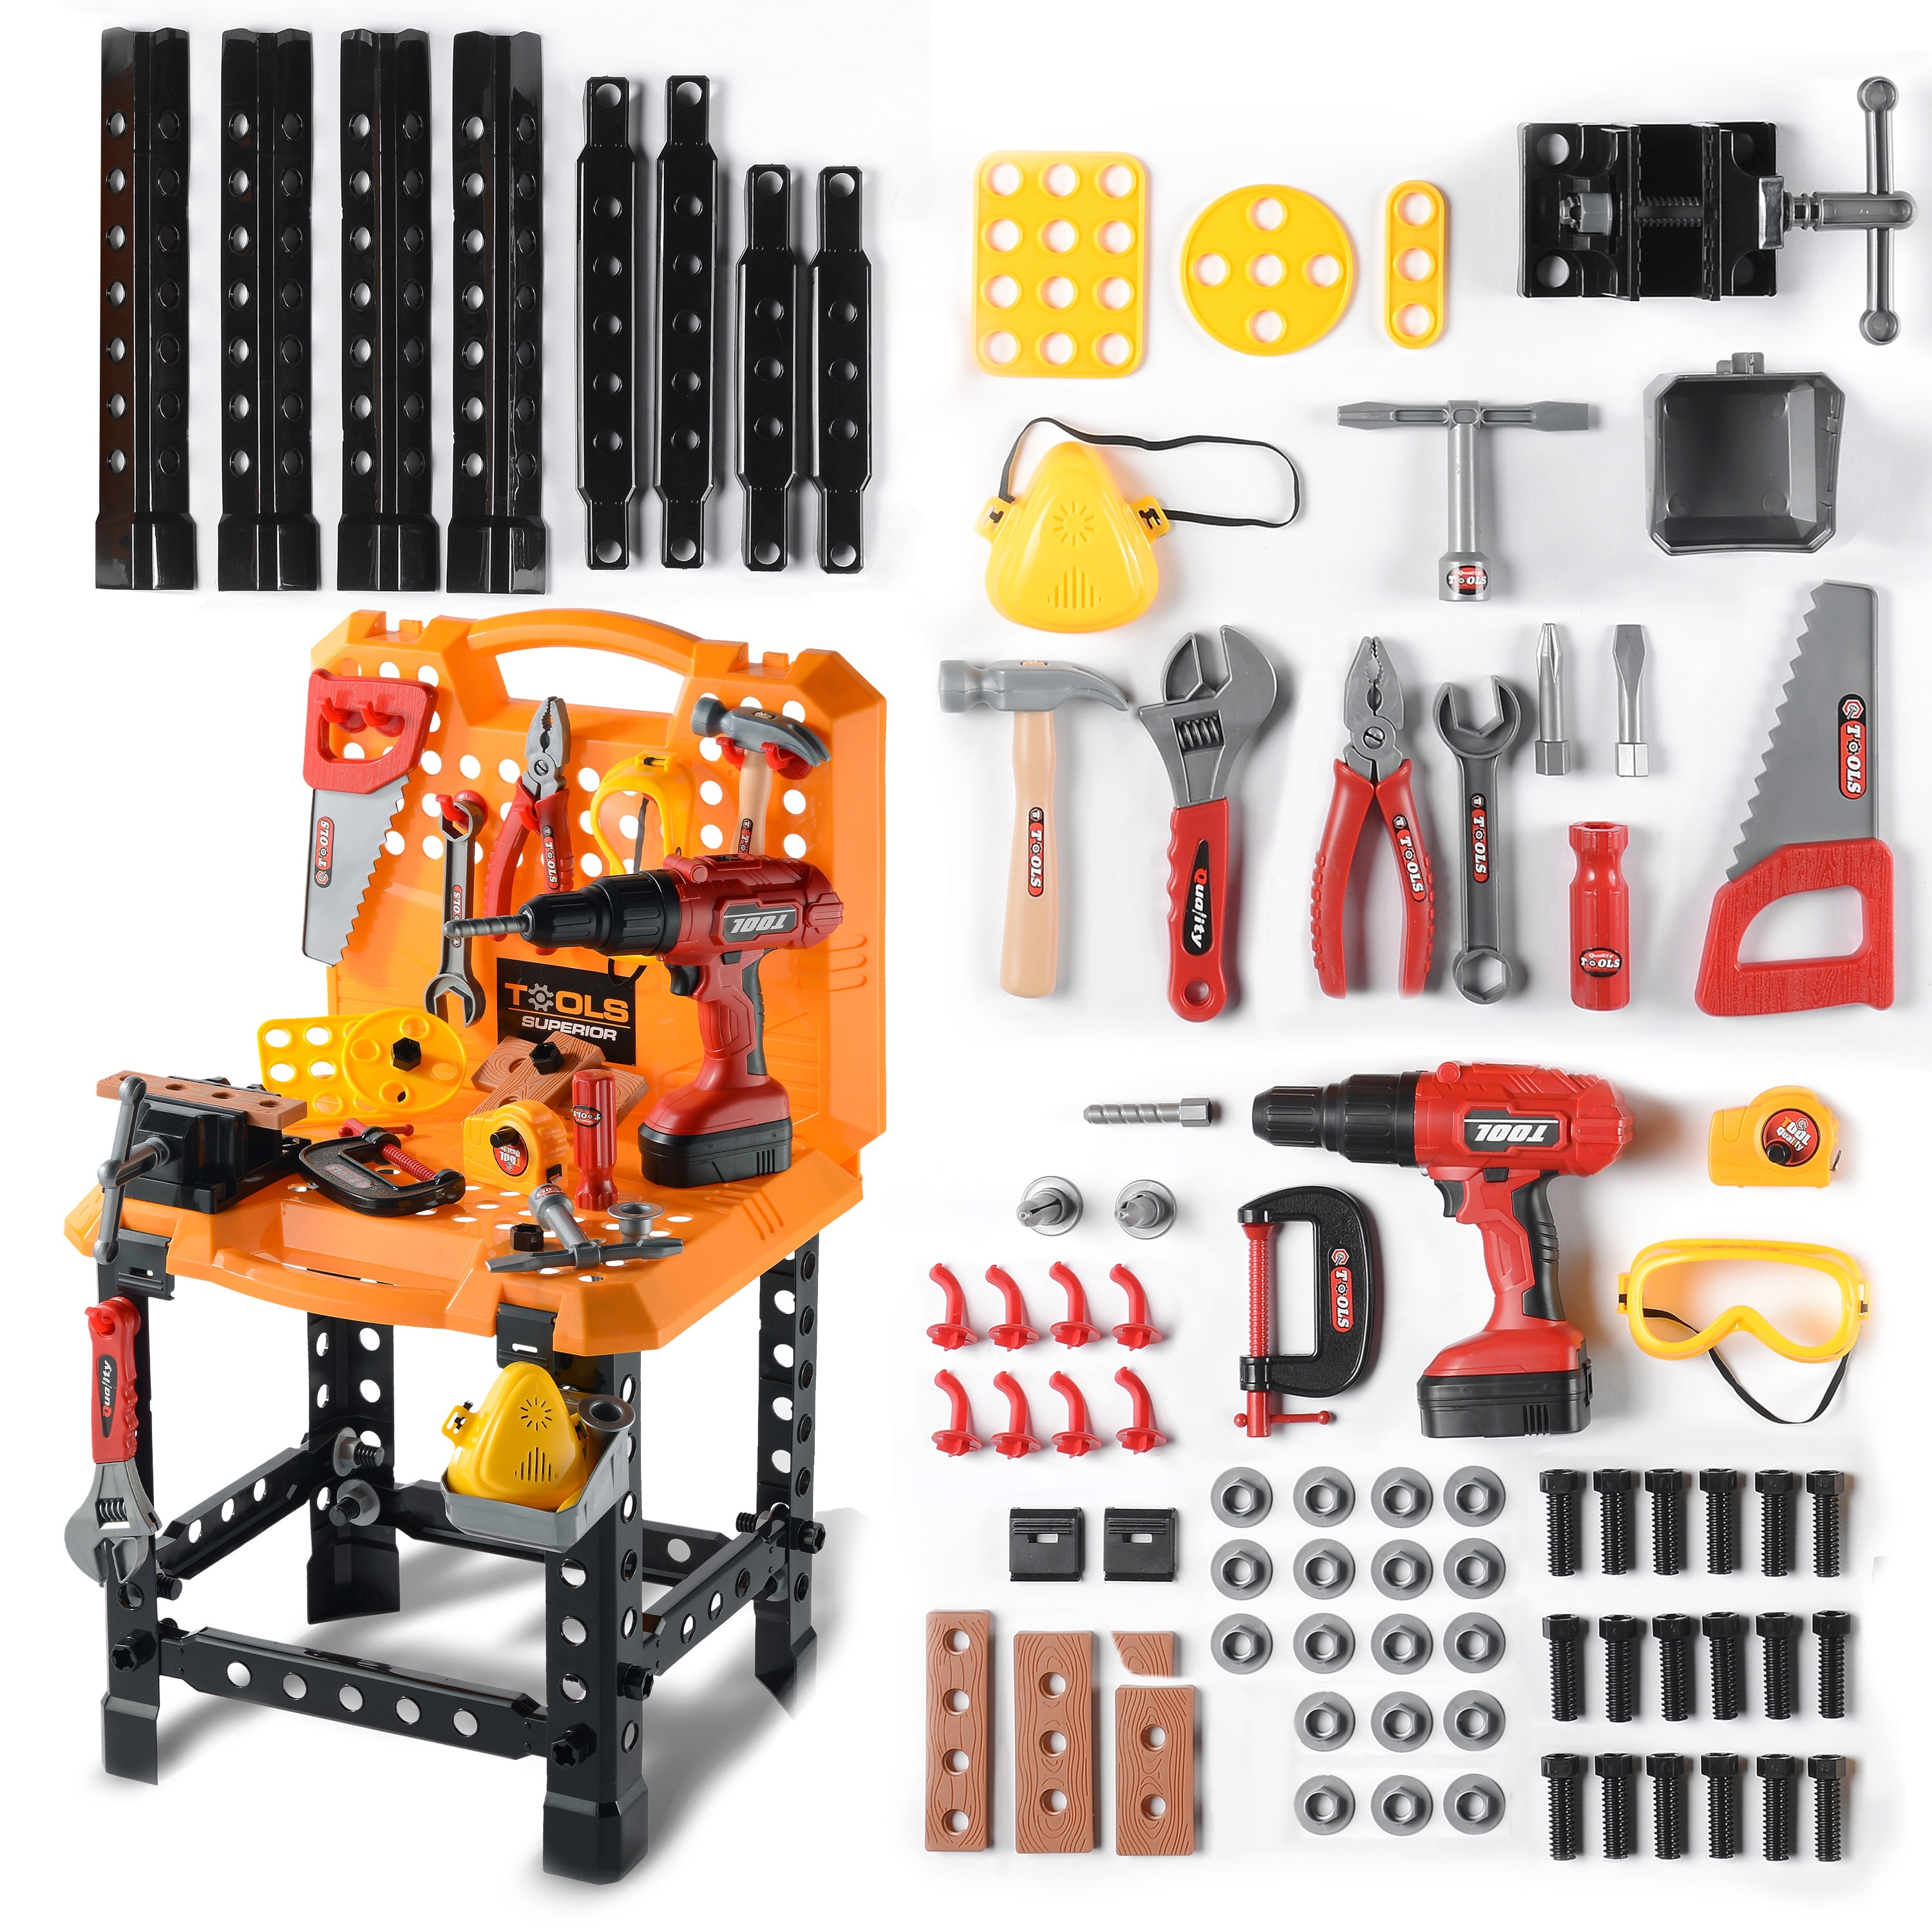  Toy Choi's Kids Workbench - STEM Toy Tool Set with Realistic  Tools and Electric Drill, 82pcs Pretend Play Toddler Tool Bench Kids Power  Tools Construction Toys Outdoor Gift for Boys Girls